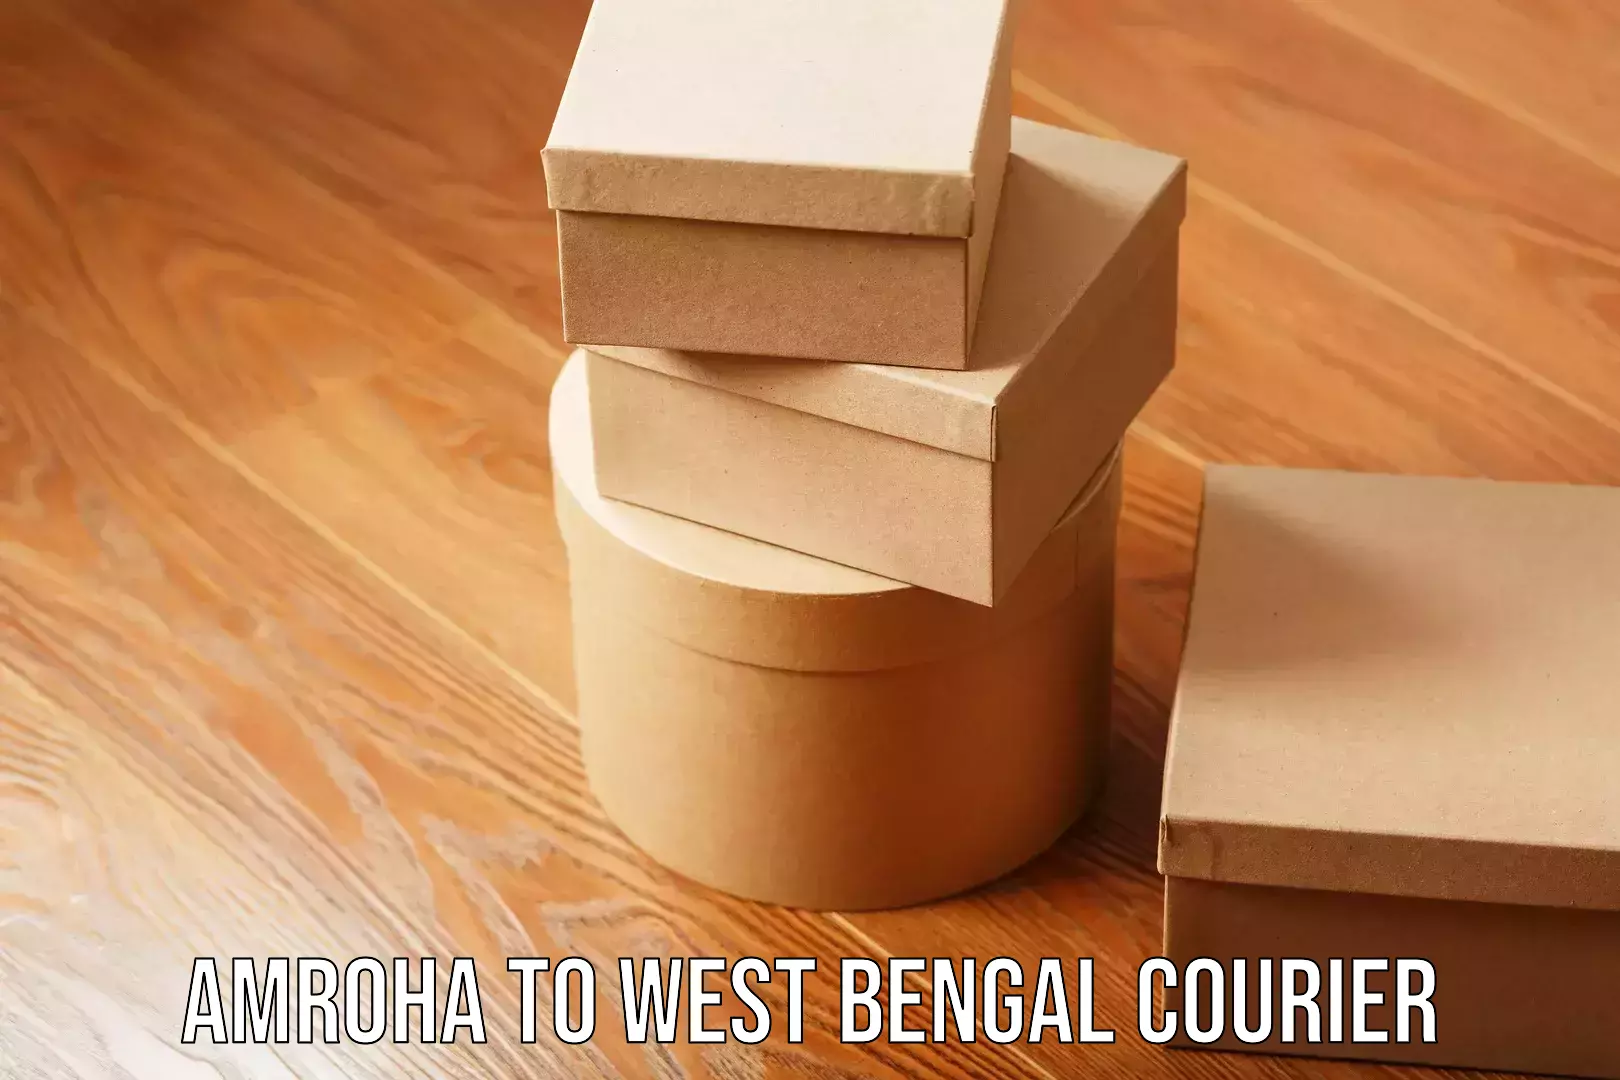 Efficient shipping platforms Amroha to West Bengal